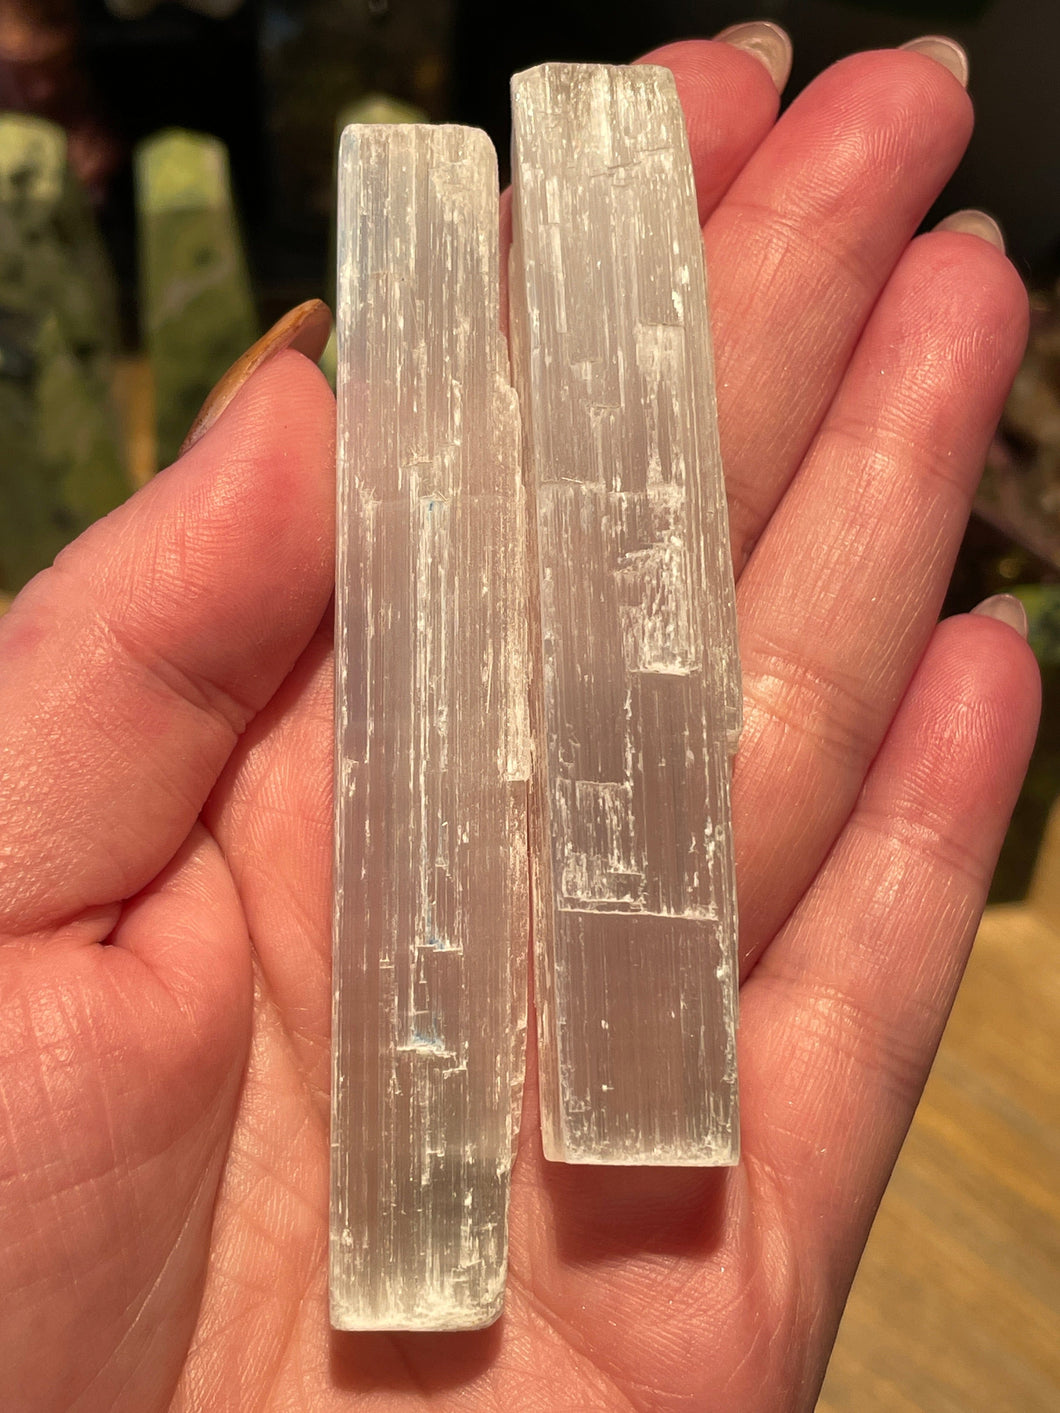 The Consecrated Crystal Selenite (Satin Spar)Wands 3-4 inches